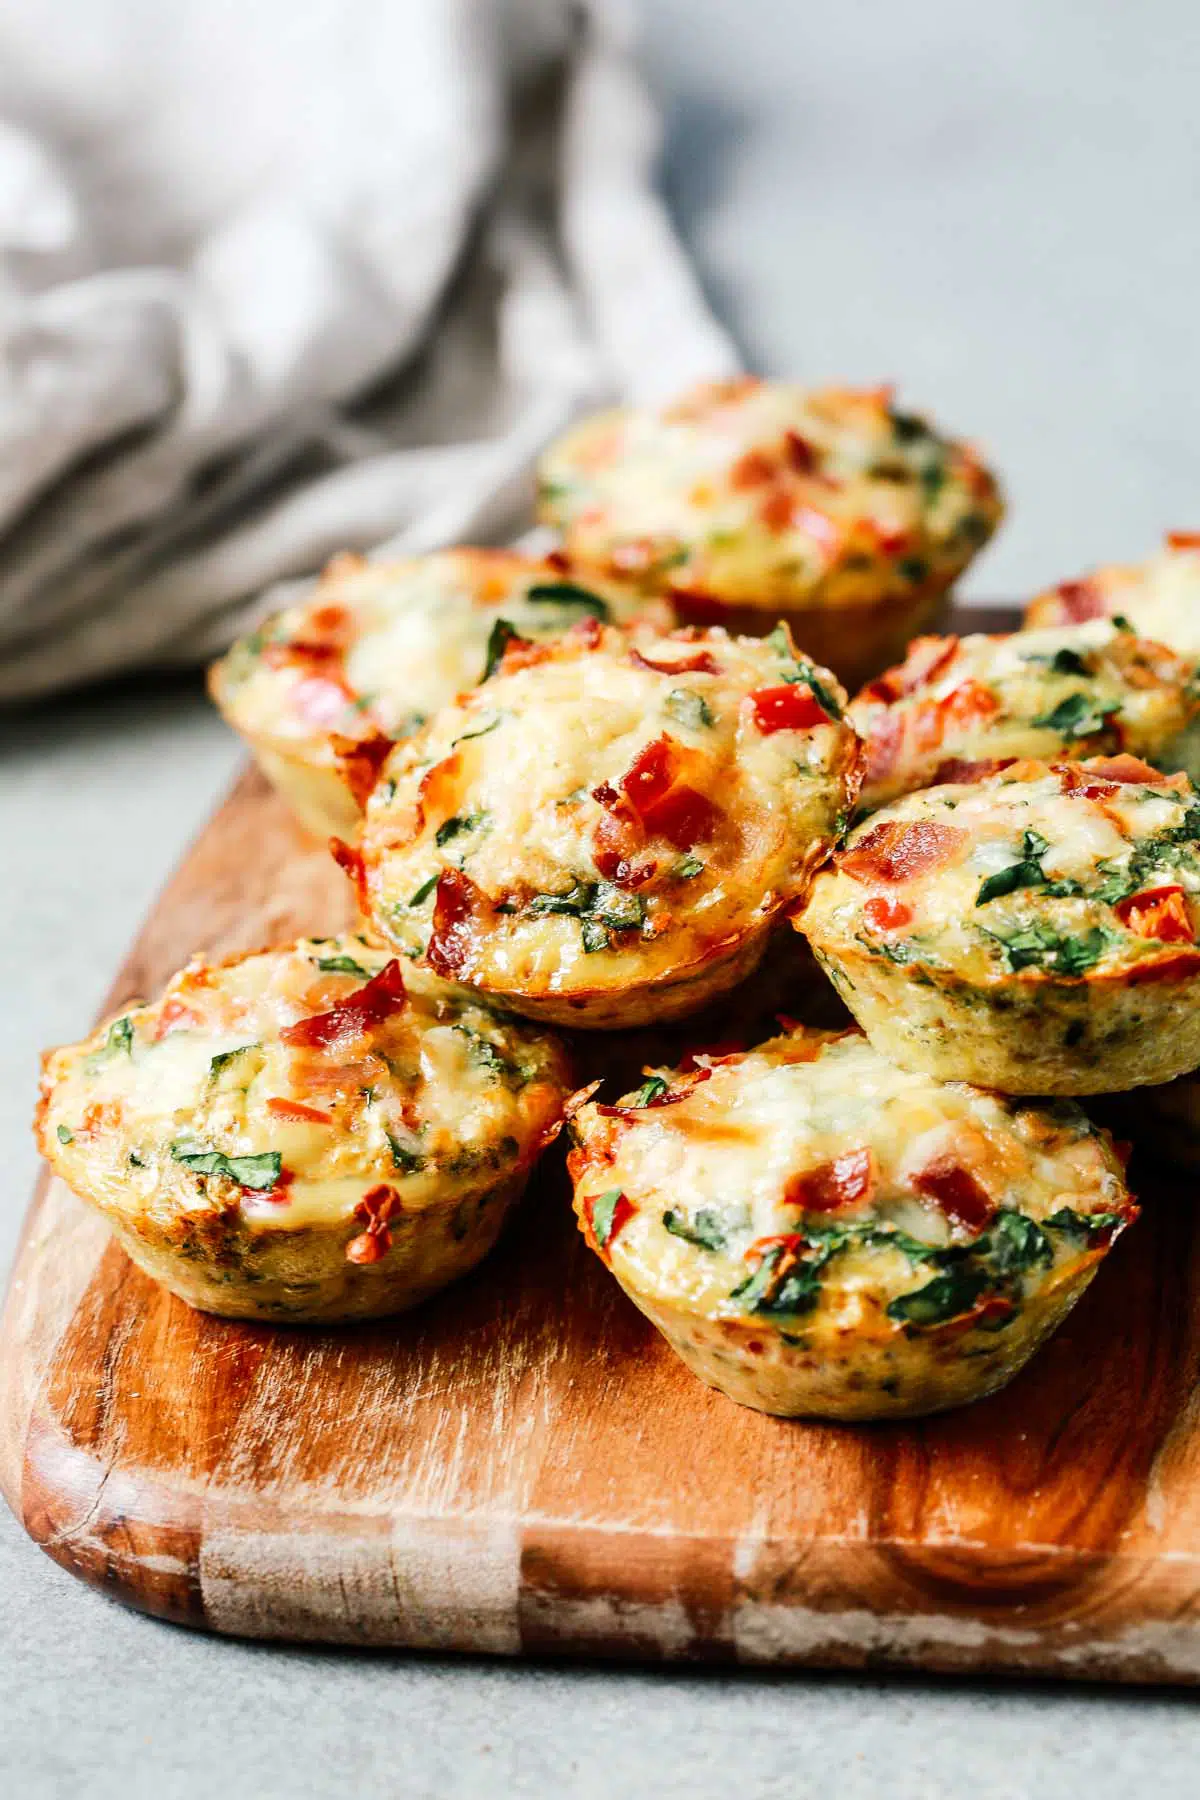 egg and vegetable muffins on wooden cutting board